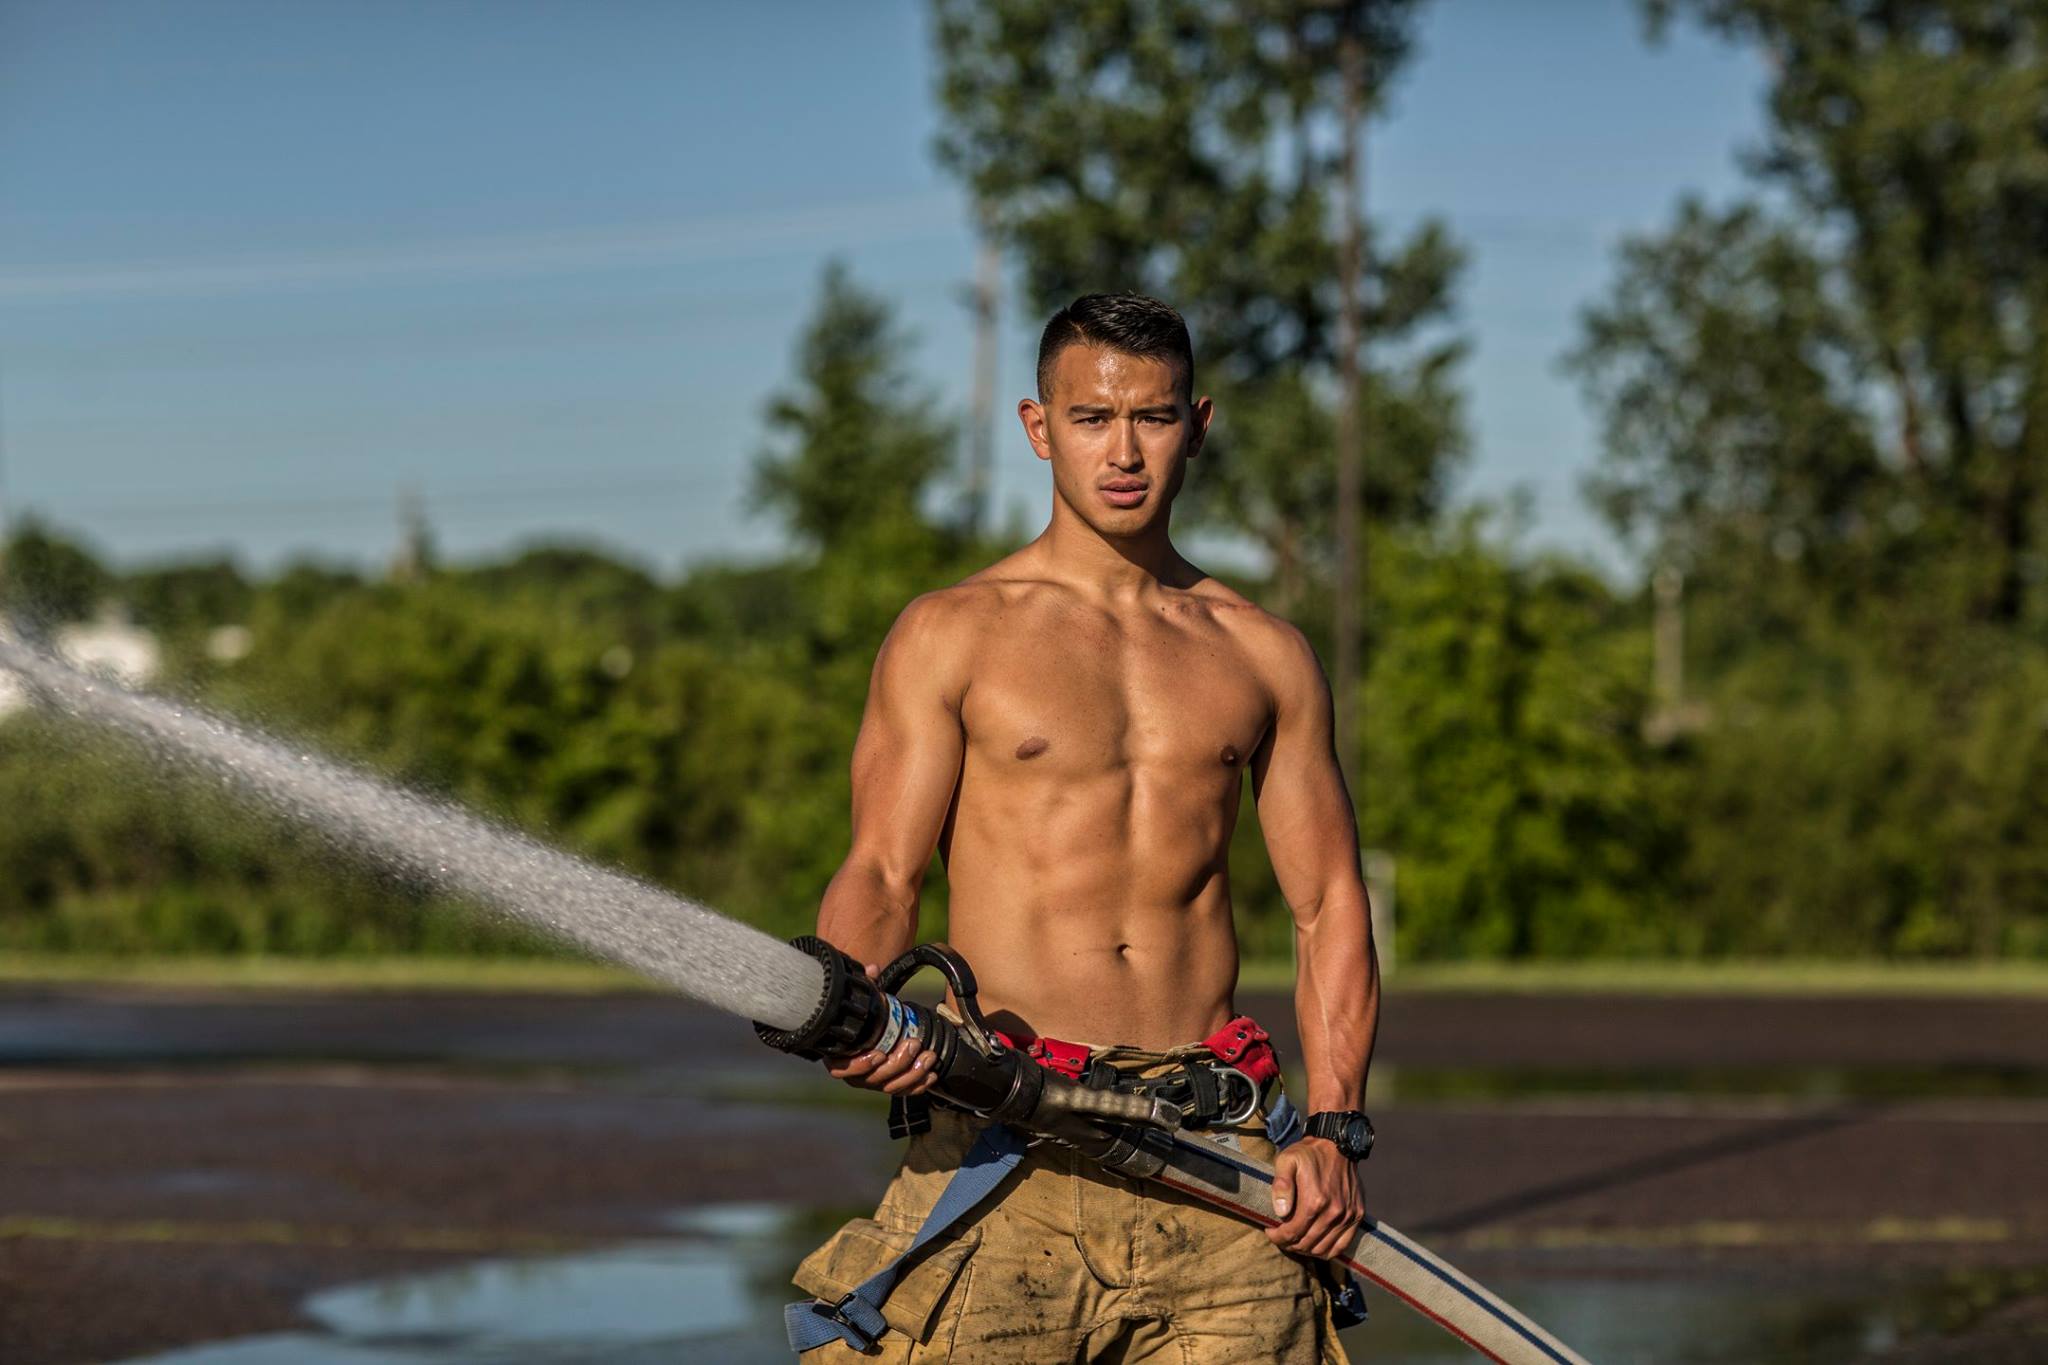 Putting Fires Out with the very Best of Firefighter Calendars 2018